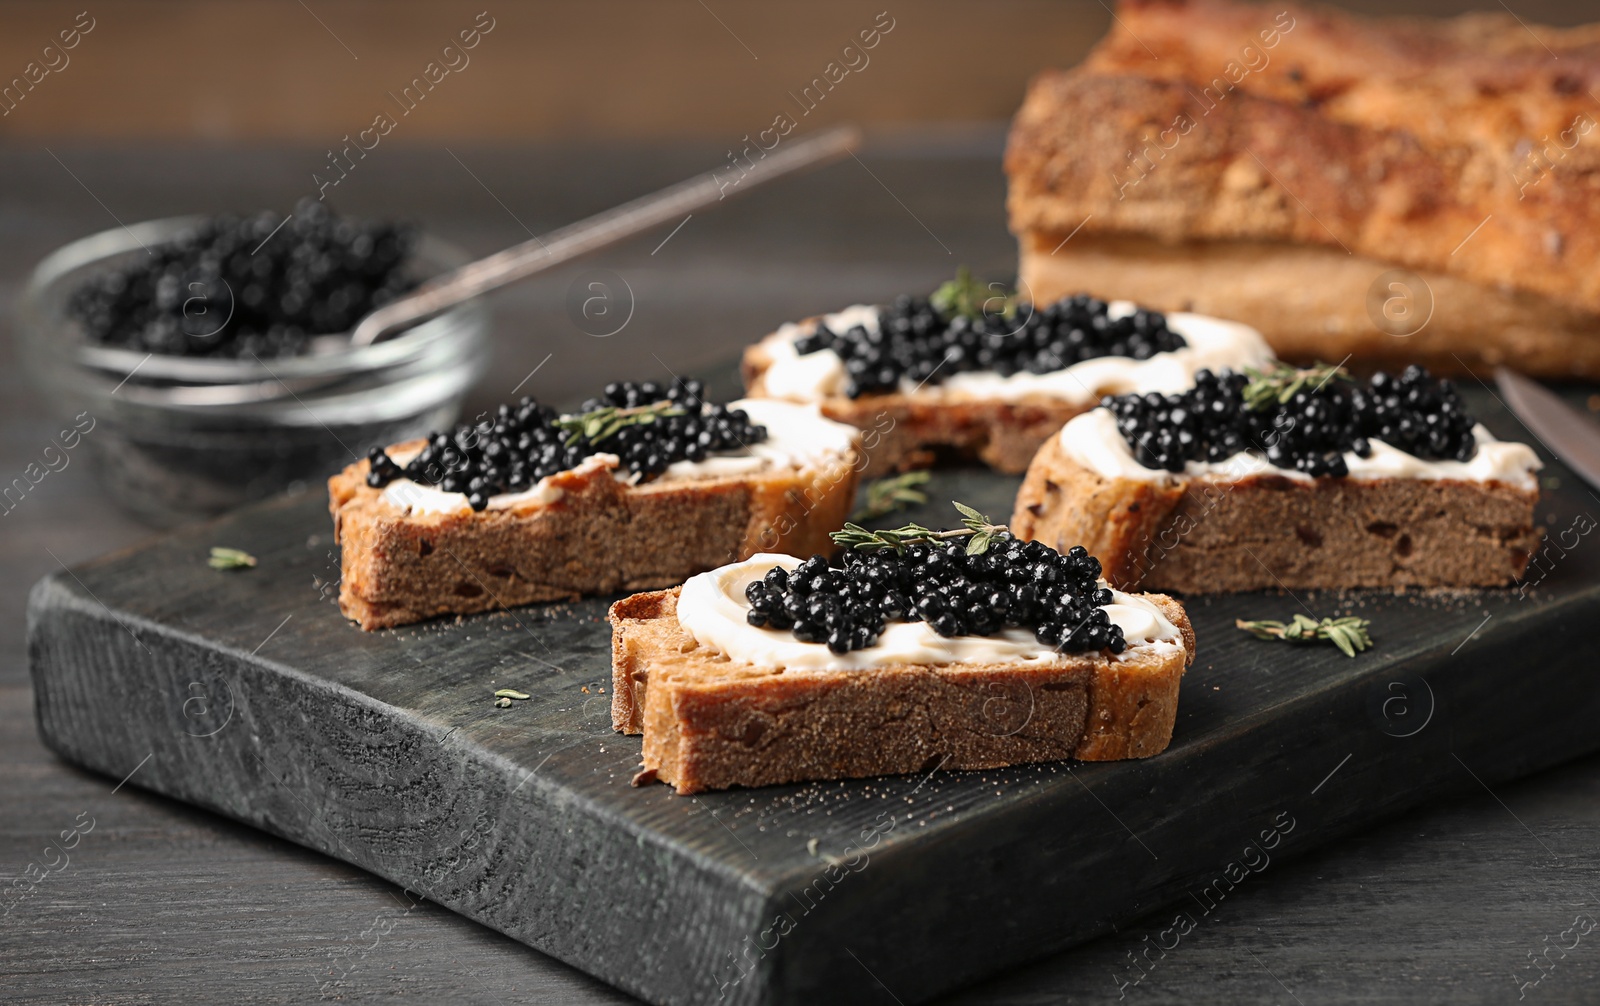 Photo of Sandwiches with black caviar and butter on wooden board